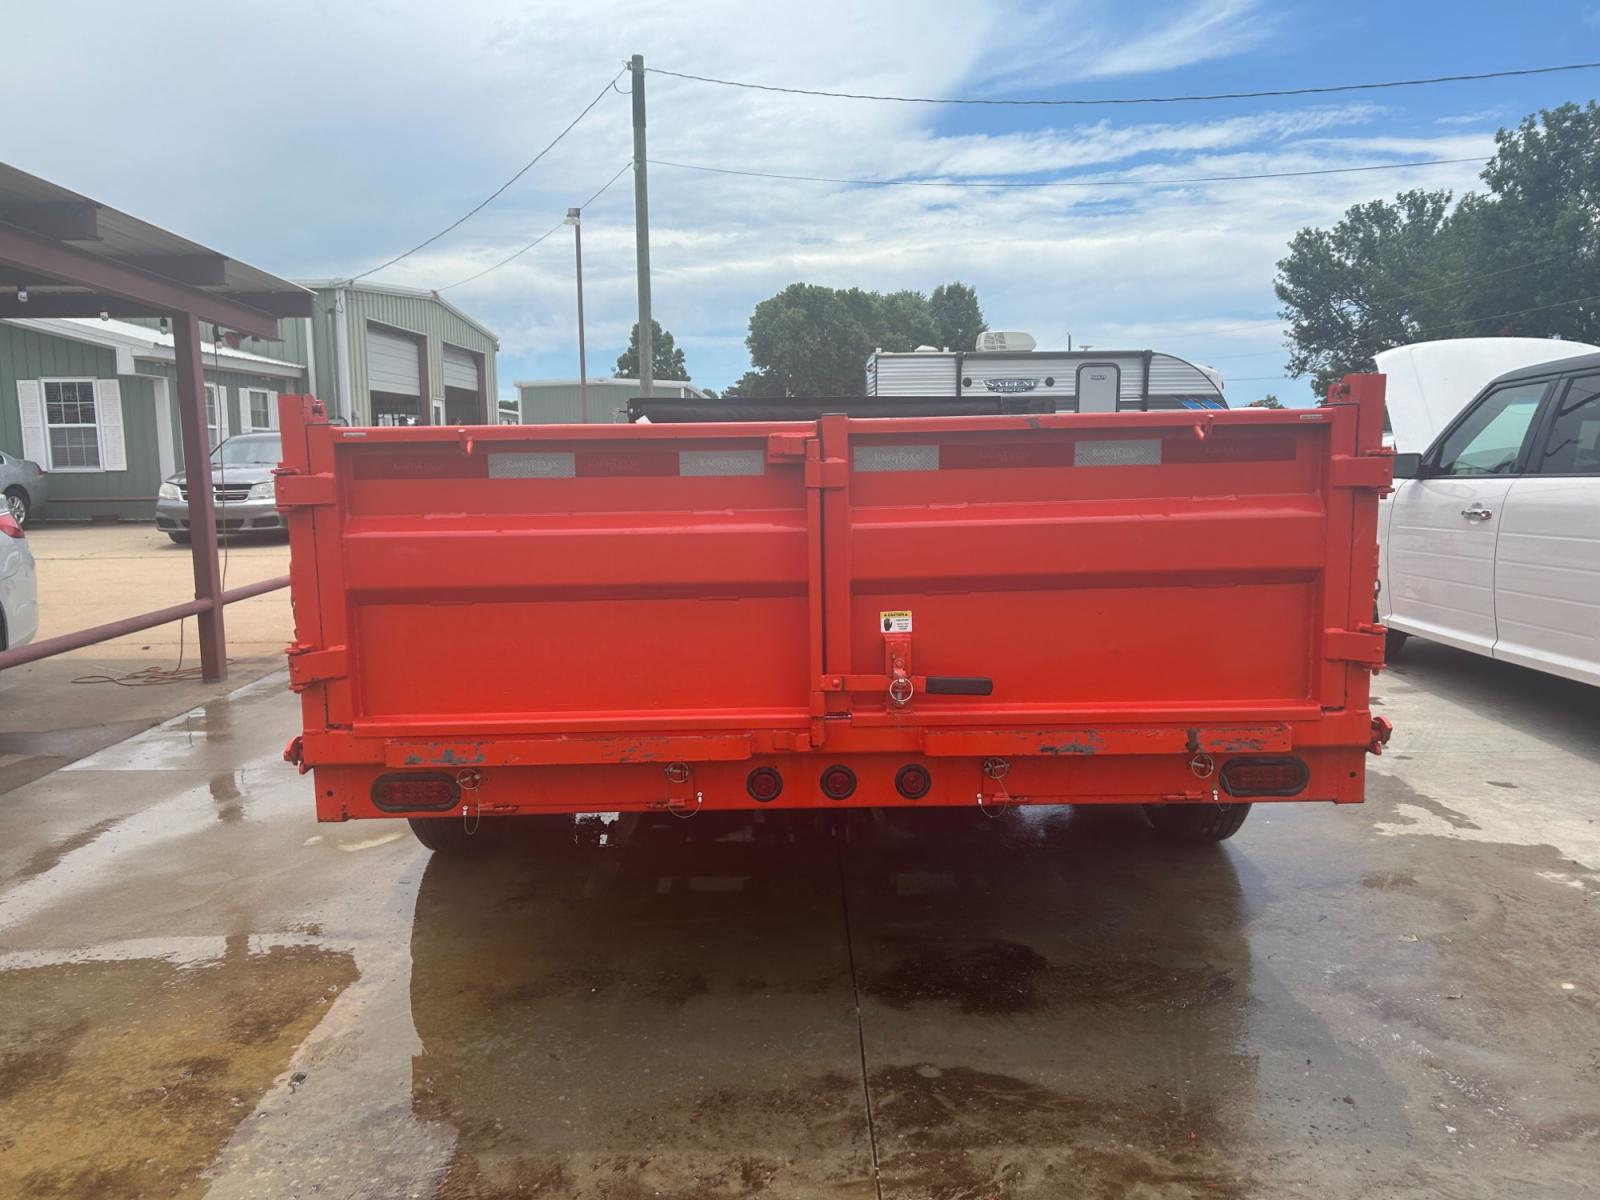 2023 ORANGE EAST TEXAS TRAILER DUMPBED (58SBD1627PE) , located at 17760 Hwy 62, Morris, OK, 74445, 35.609104, -95.877060 - 2023 EAST TEXAS DUMP BED TRAILER IS 16X83, 14,000 GVWR, 2-7000 LB DEXTER ELECTRIC BREAK SYSTEM, TONGUE MOUNTED TOOL BOX, 7 GA FLOOR, 80" SLIDE IN RAMPS, 7 WAY PLUG, LED LIGHTS, 24" HIGH 10 GA. SIDES, 6" 12 LB I-BEAM FRAME, 6" 12 LB I-BEAM TONGUE. TITLE IN HAND. TRAILER IS BASICALLY NEW AND HAS ONLY - Photo #2